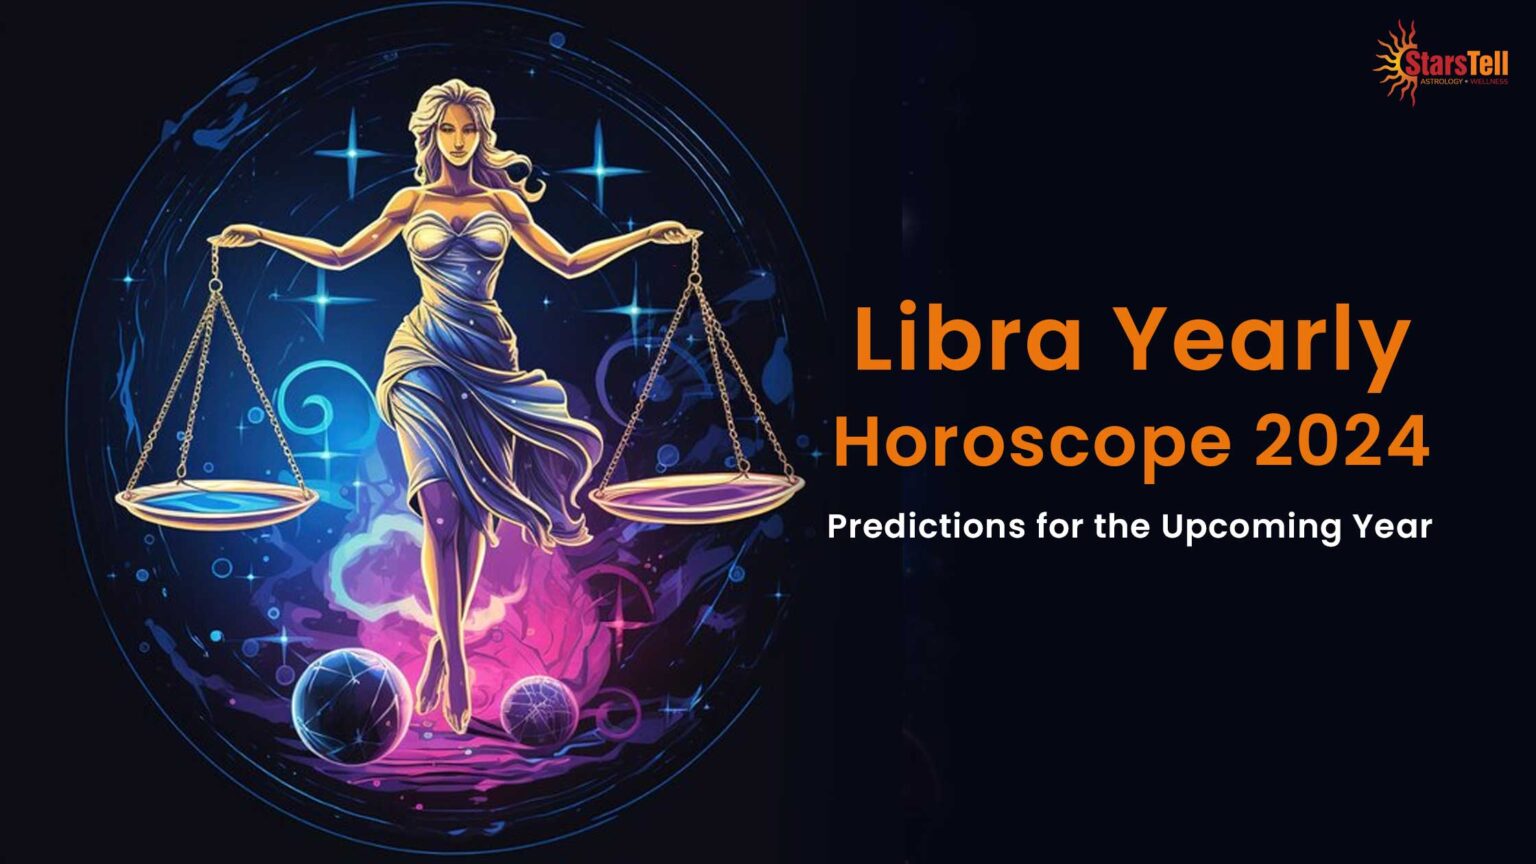 Libra Yearly Horoscope 2024 Predictions for the Year